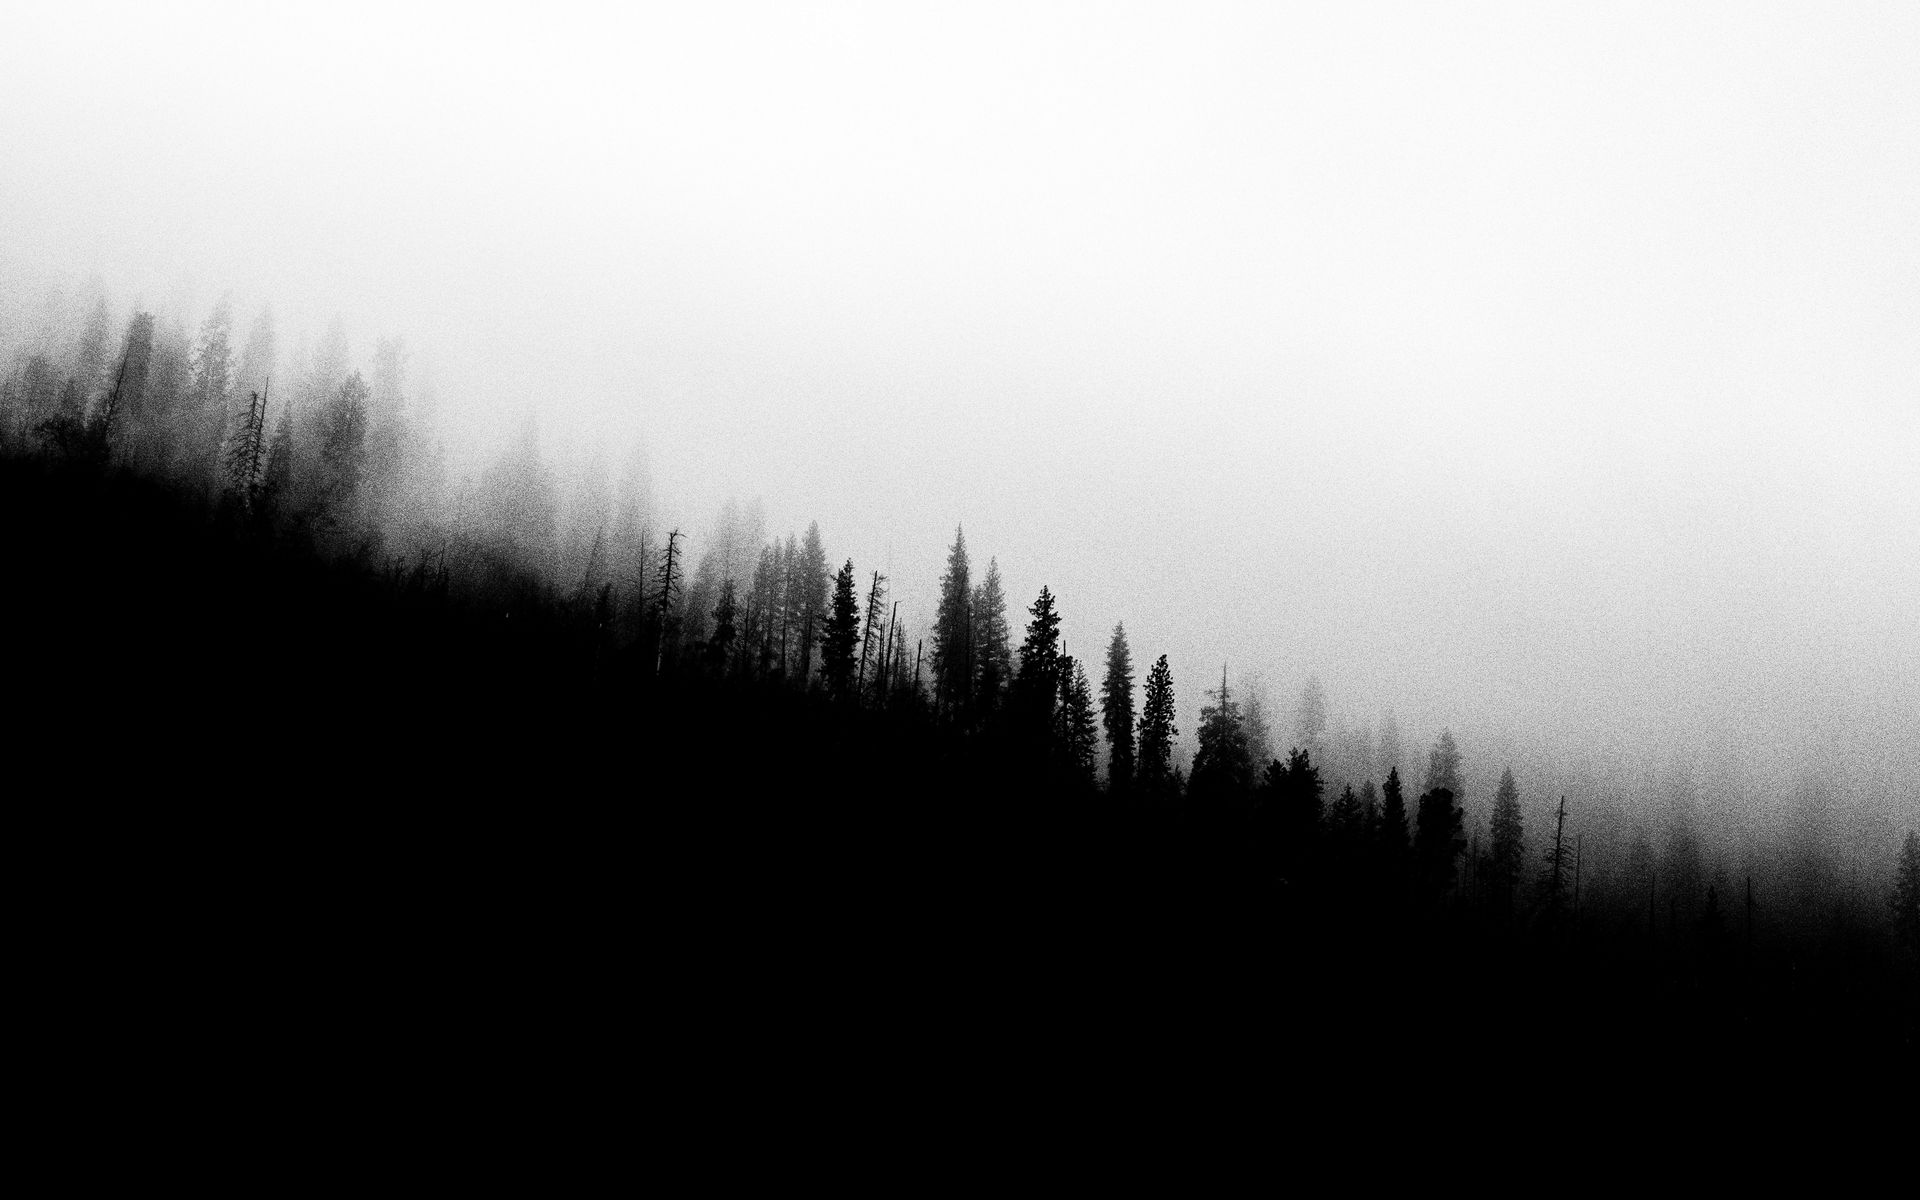 Download wallpaper 1920x1200 forest, slope, silhouettes, trees, black ...